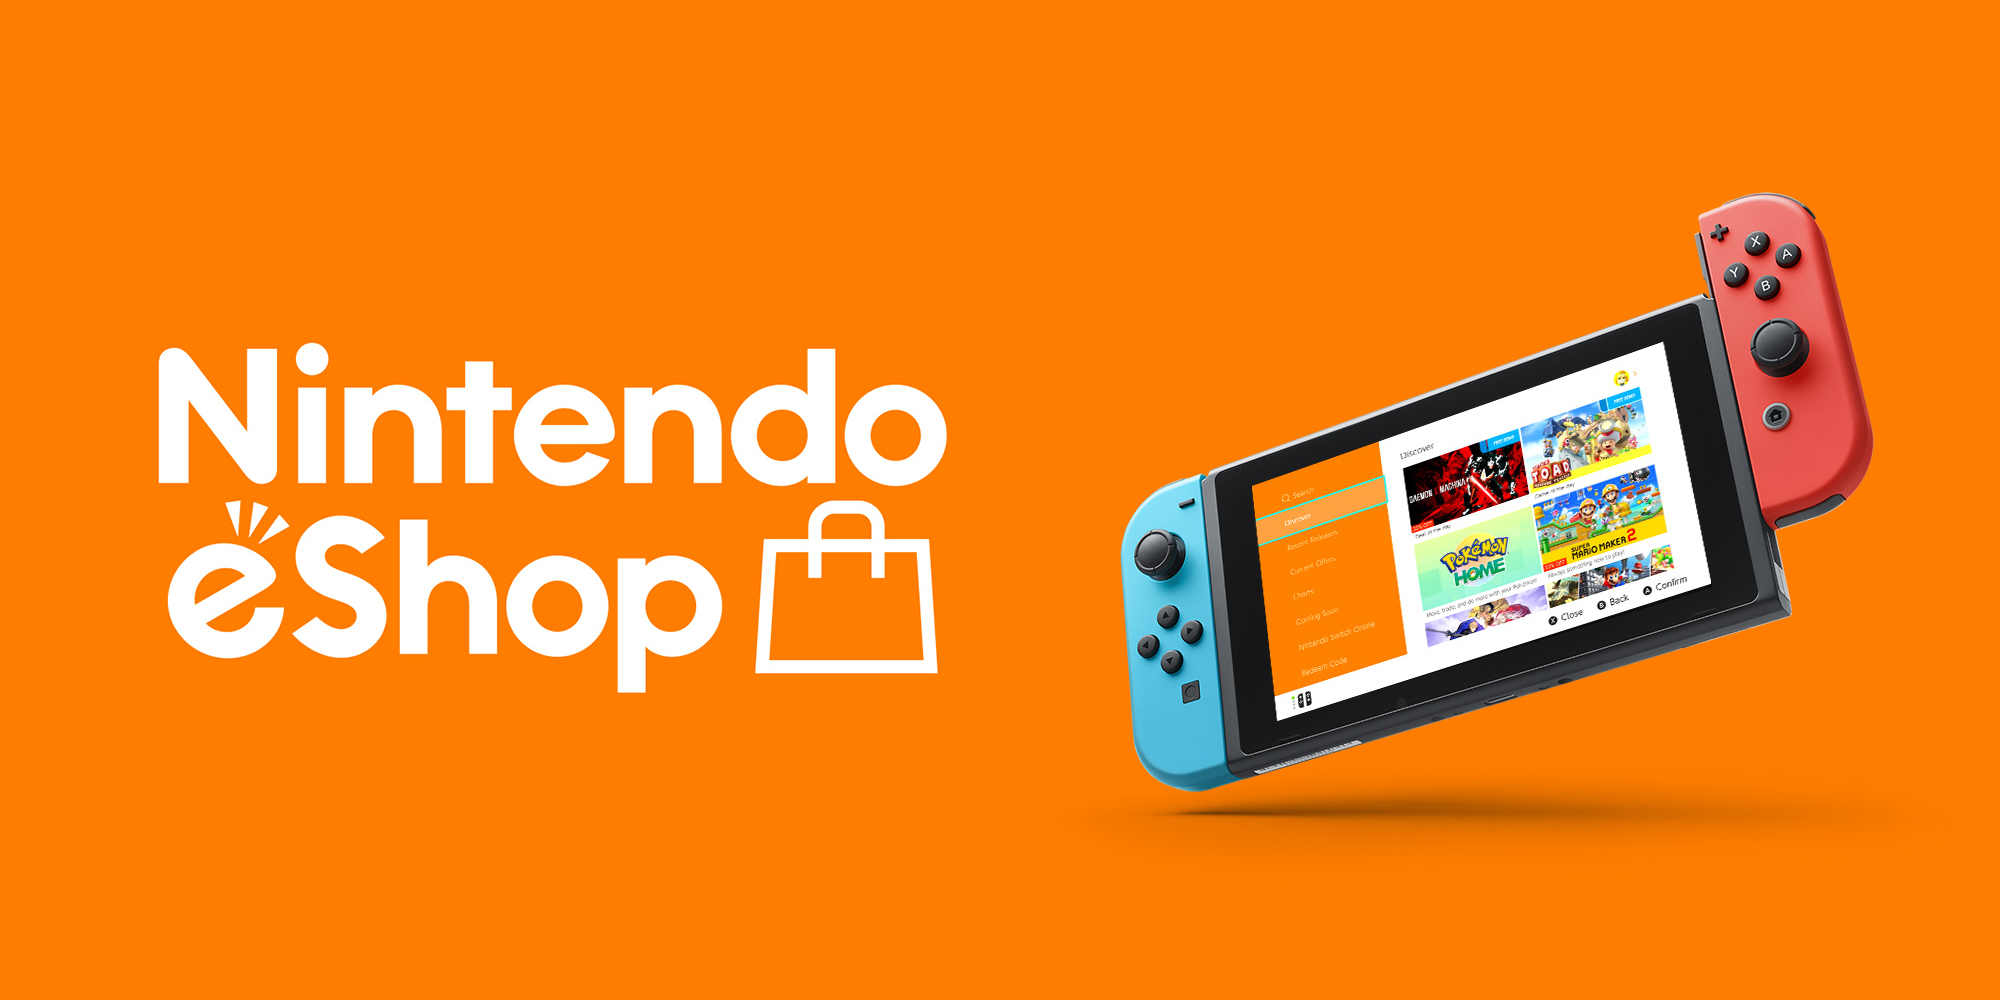 experiencing issues with eShop | The GoNintendo Archives | GoNintendo